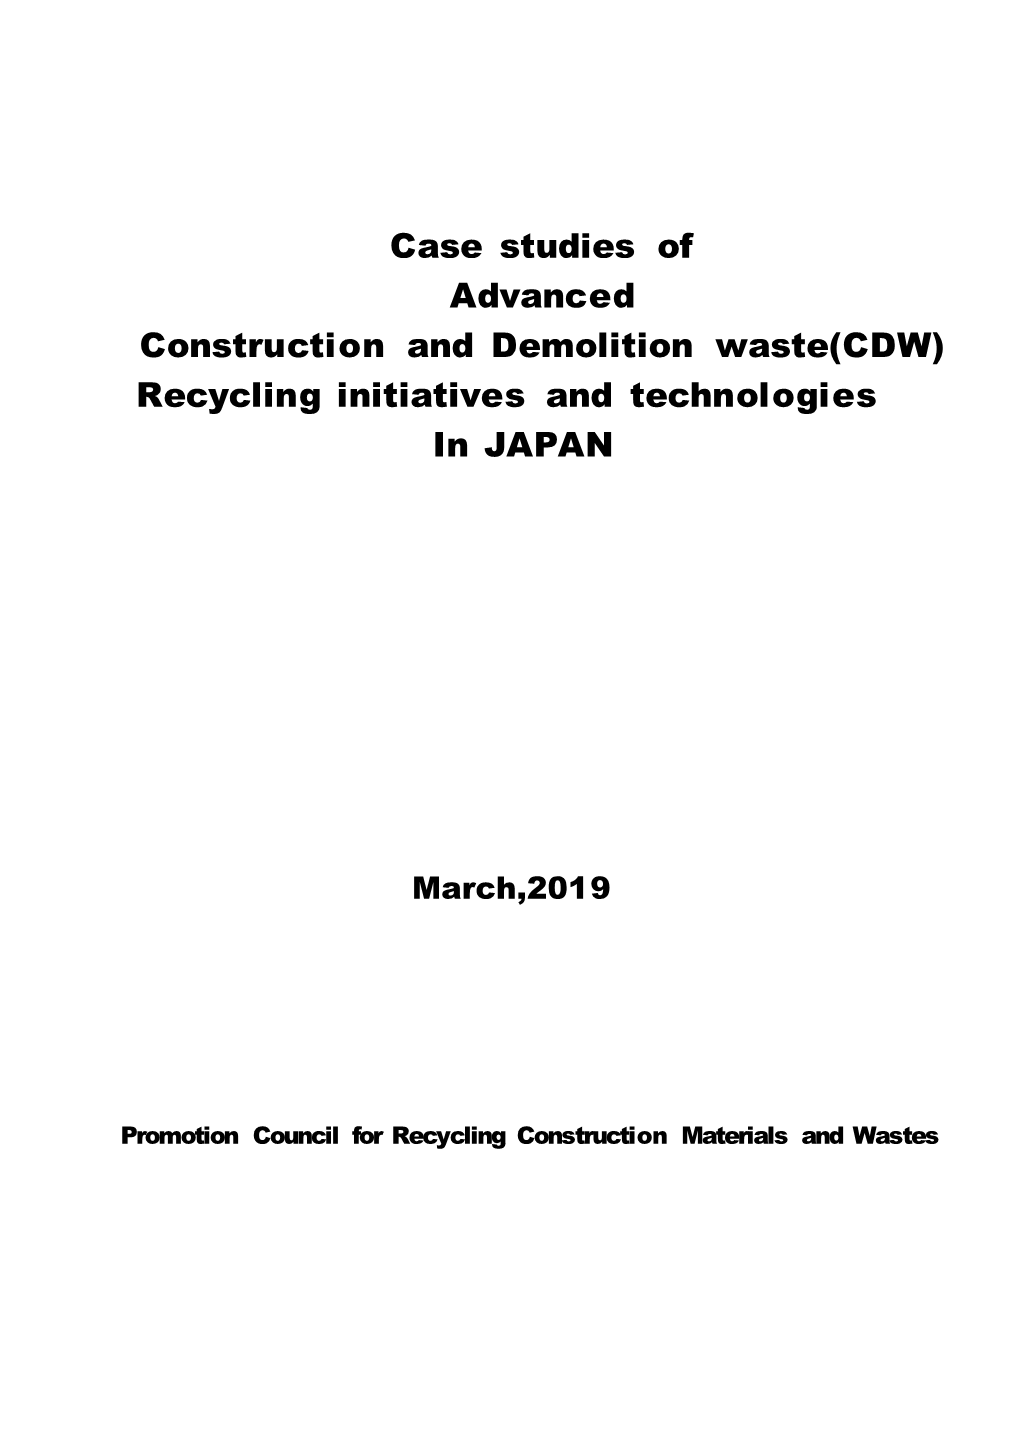 Case Studies of Advanced Construction and Demolition Waste(CDW) Recycling Initiatives and Technologies in JAPAN”